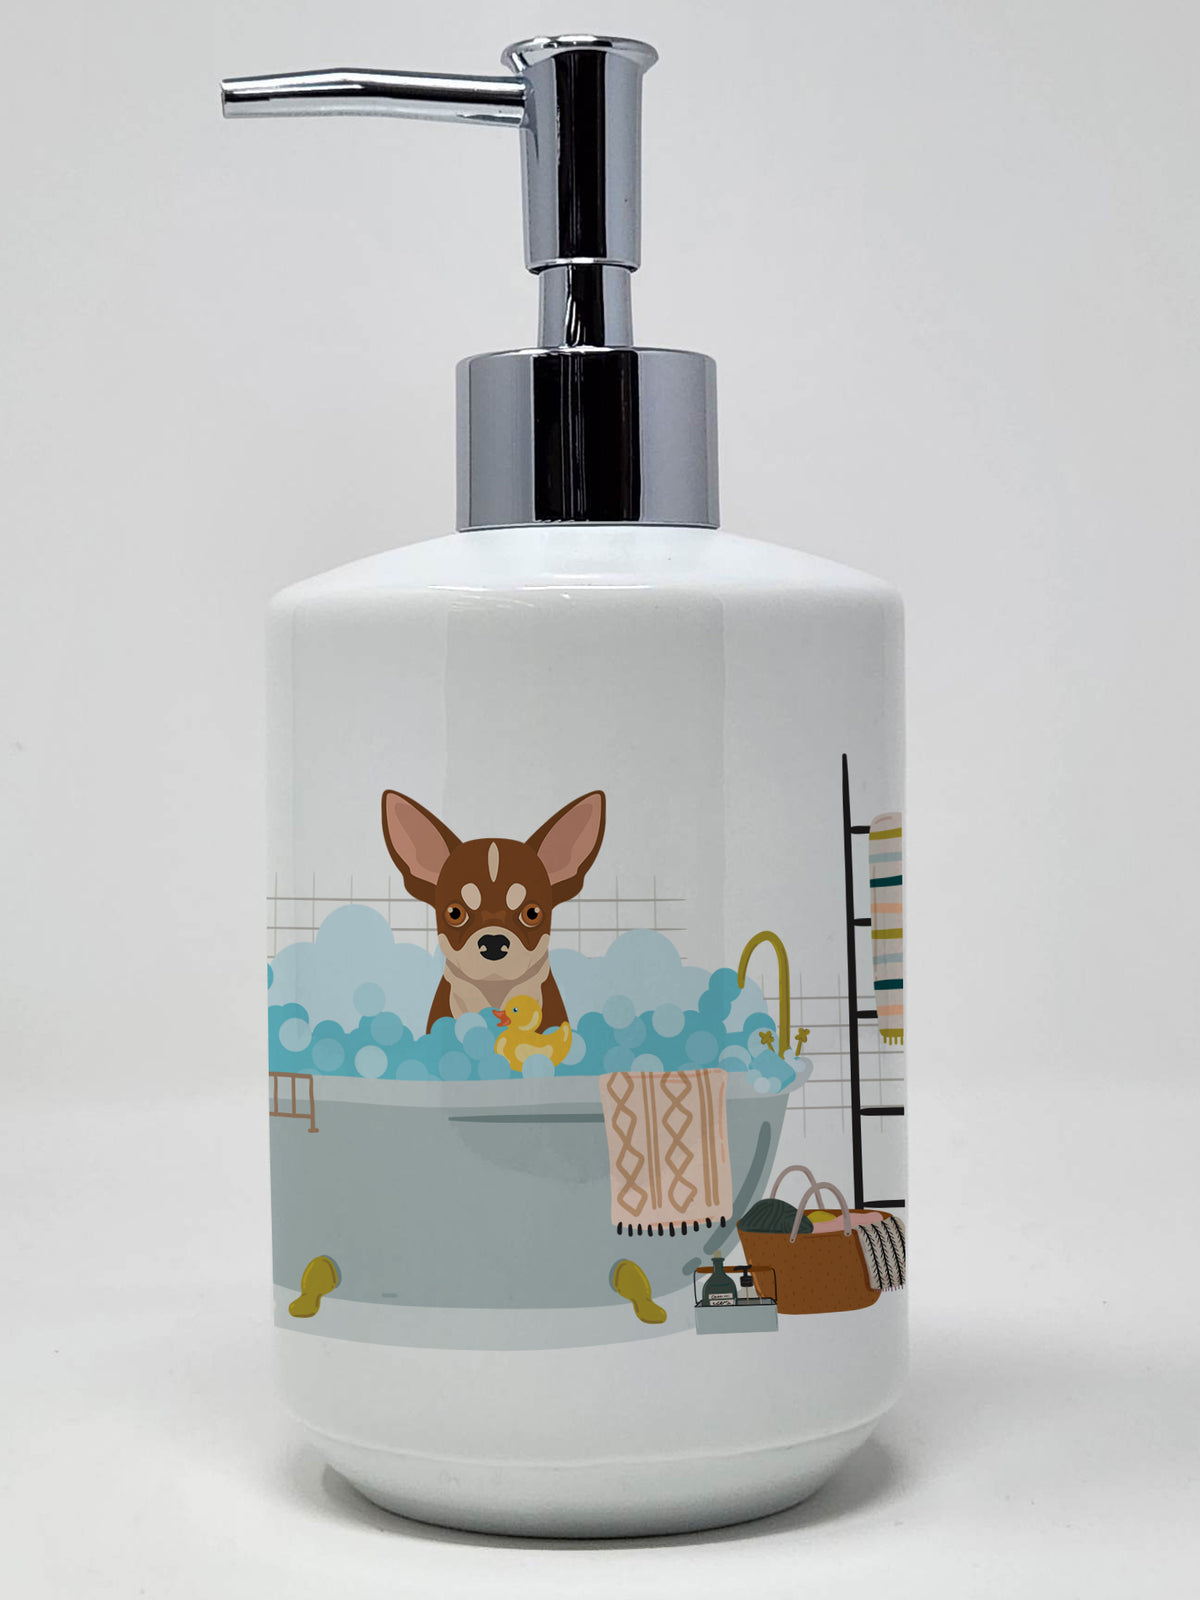 Buy this Red and White Chihuahua Ceramic Soap Dispenser